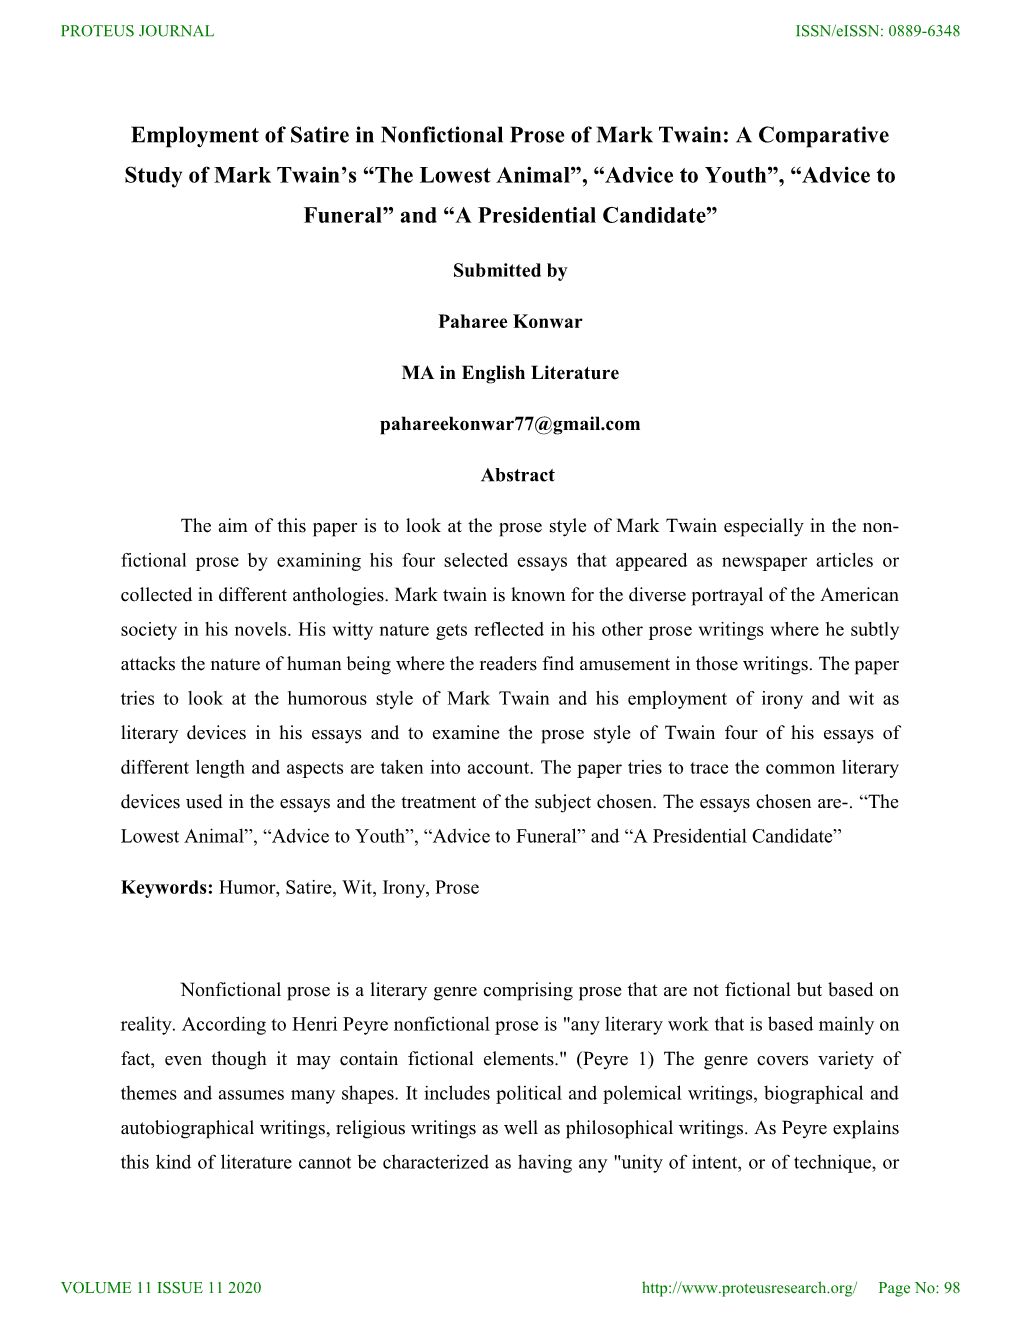 Employment of Satire in Nonfictional Prose of Mark Twain: A